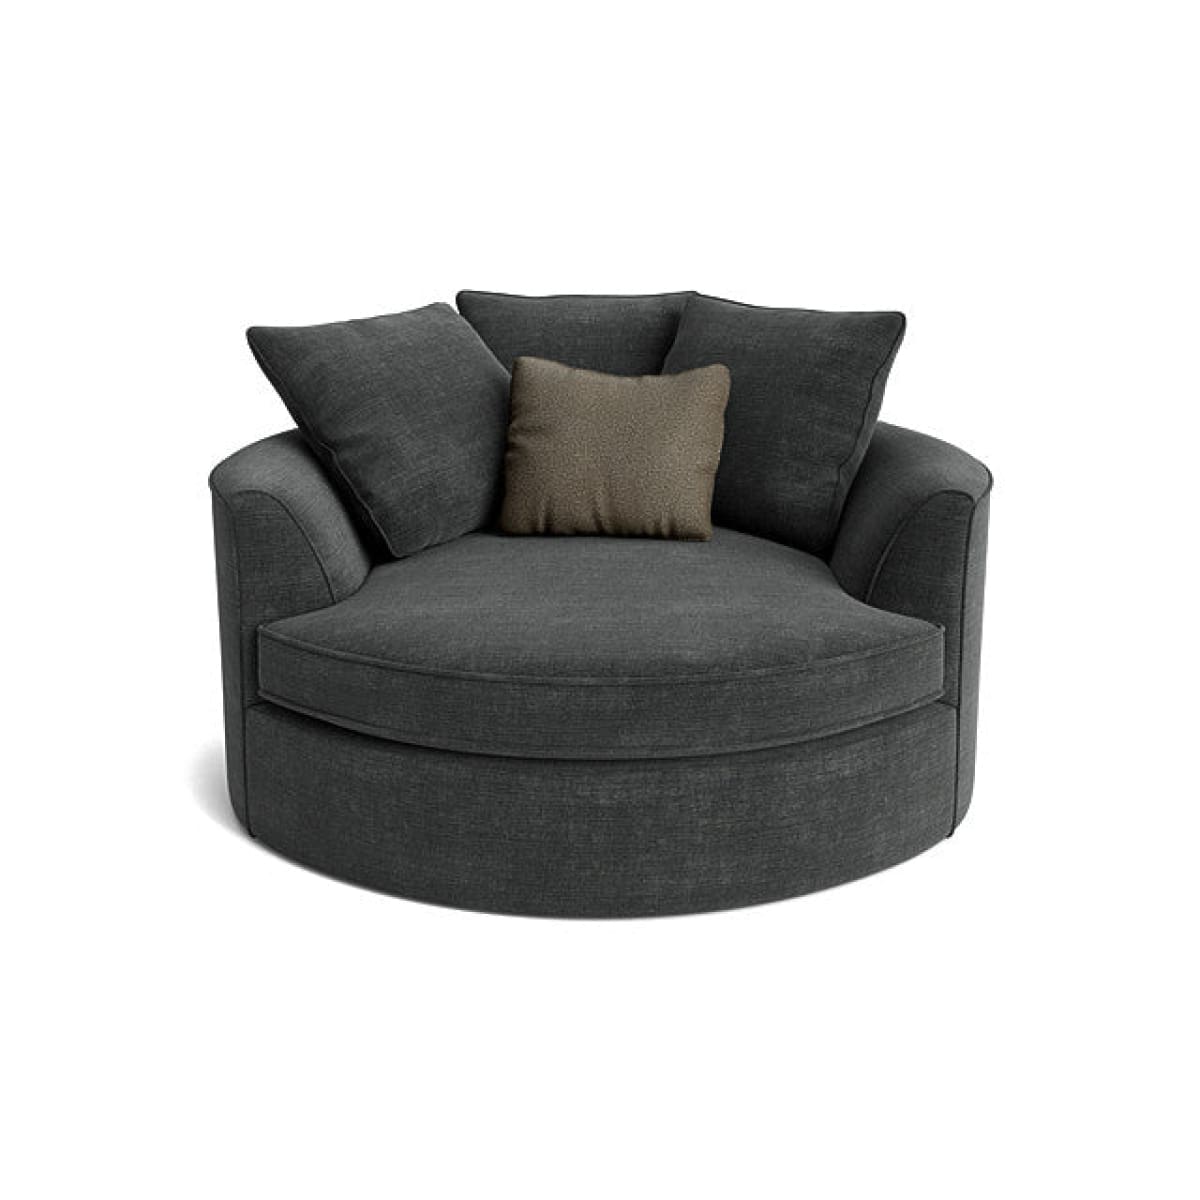 Nest Accent Chair - Analogy Charcoal